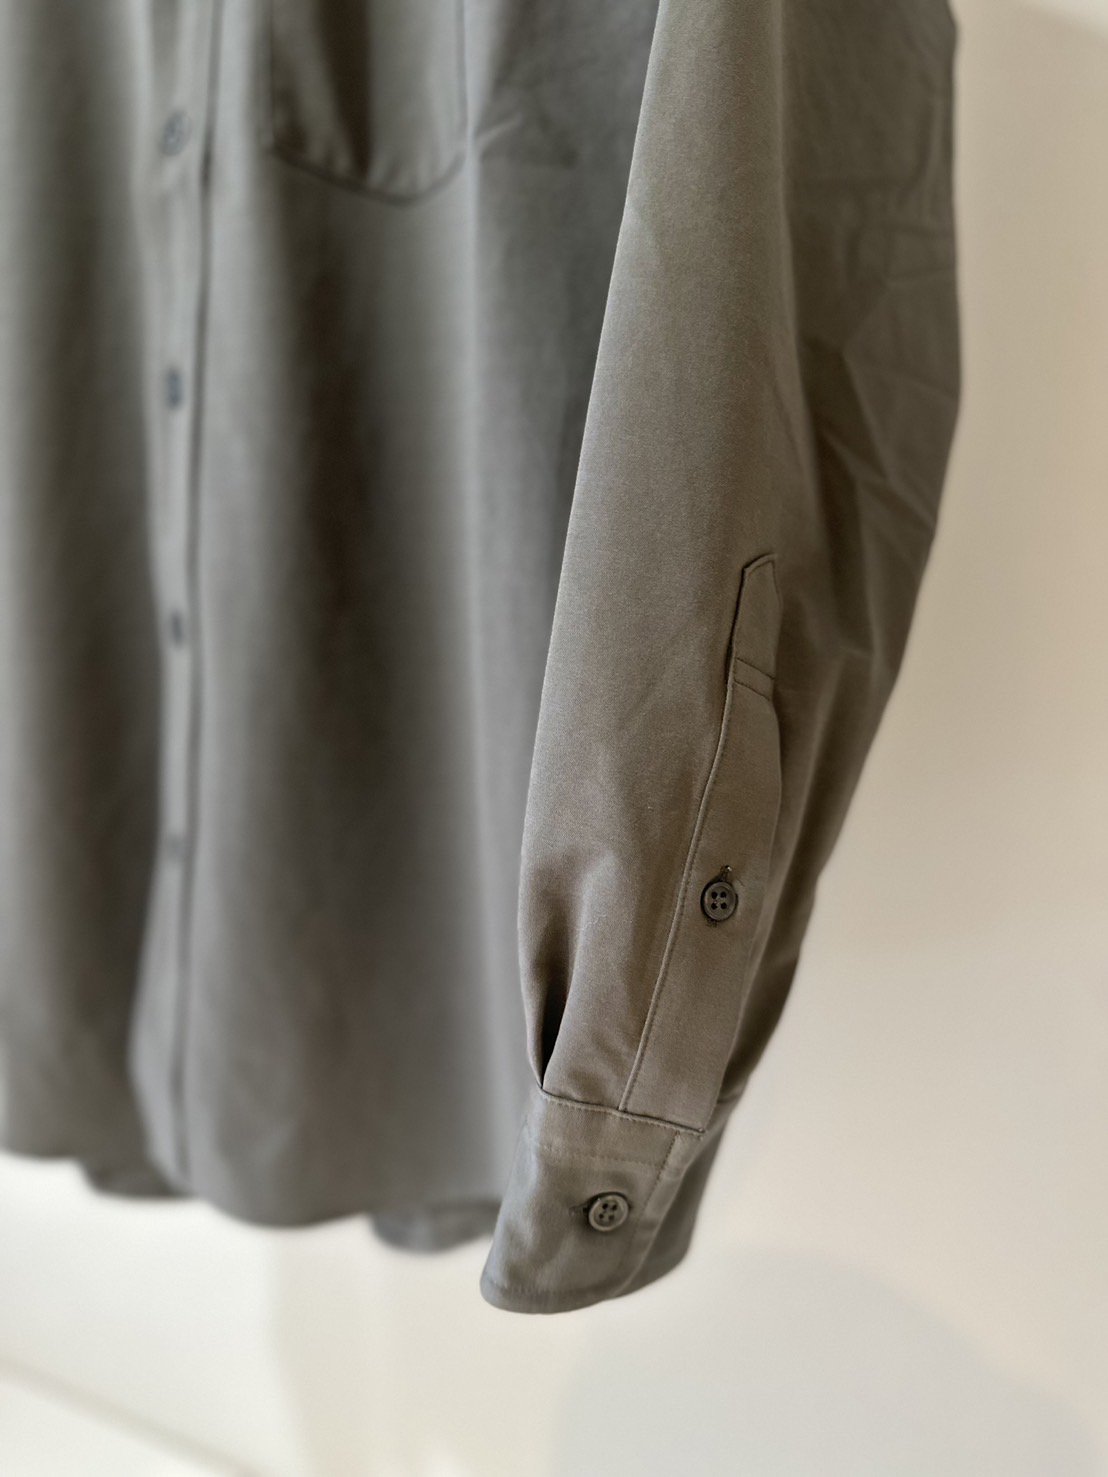 ALLEGE<br />AllegeKANEMASA Standaed Shirt / Gray<img class='new_mark_img2' src='https://img.shop-pro.jp/img/new/icons14.gif' style='border:none;display:inline;margin:0px;padding:0px;width:auto;' />